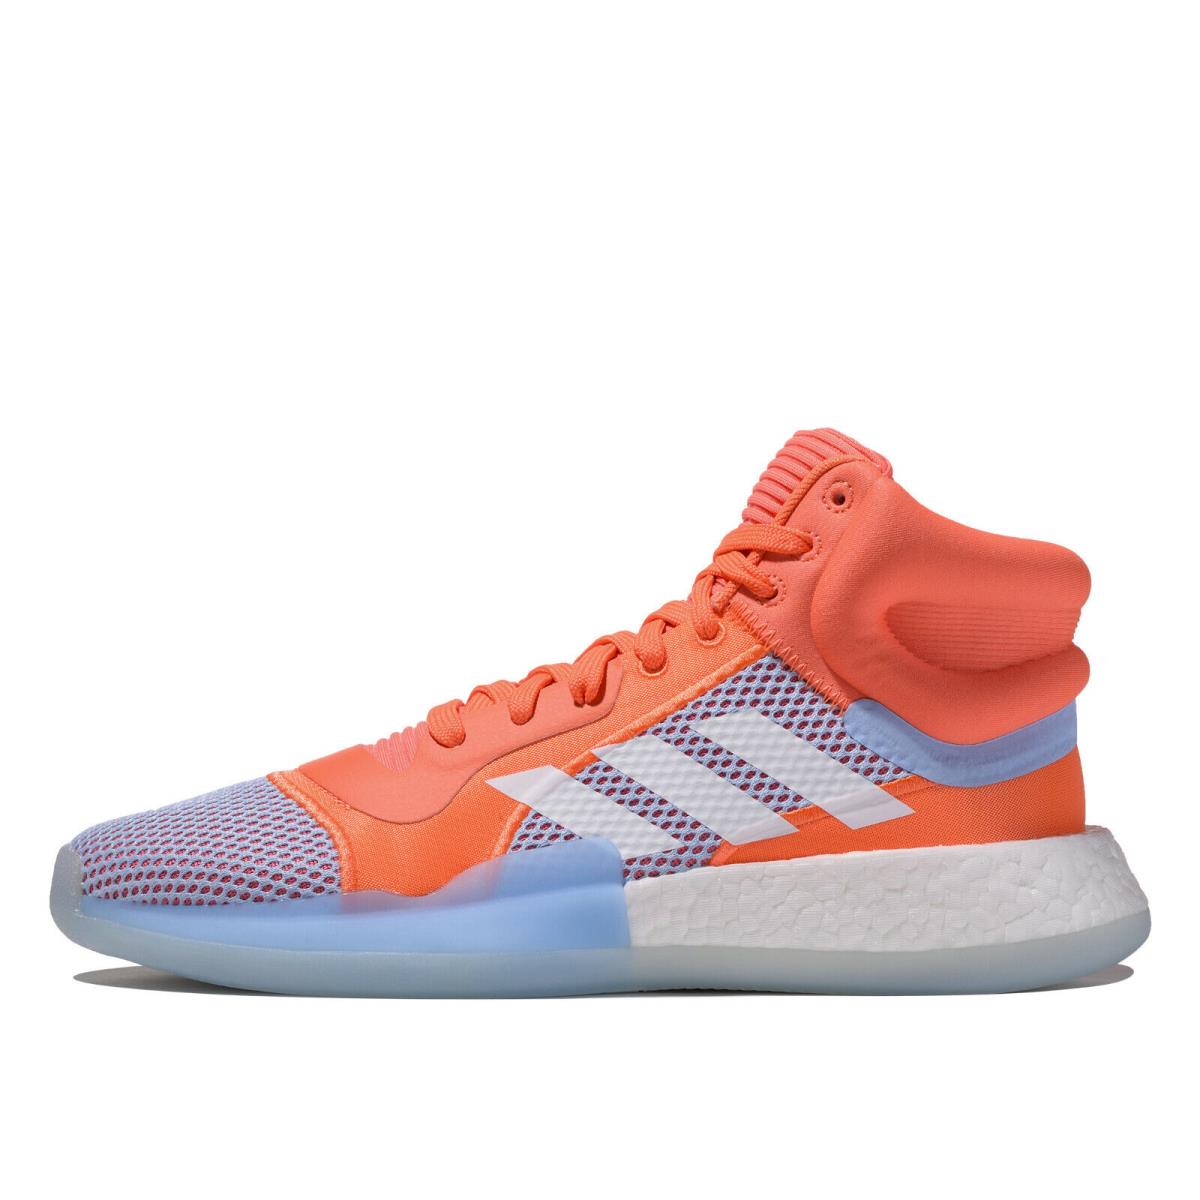 Mens Adidas Performance Marquee Boost Coral White Basketball Shoes F97276